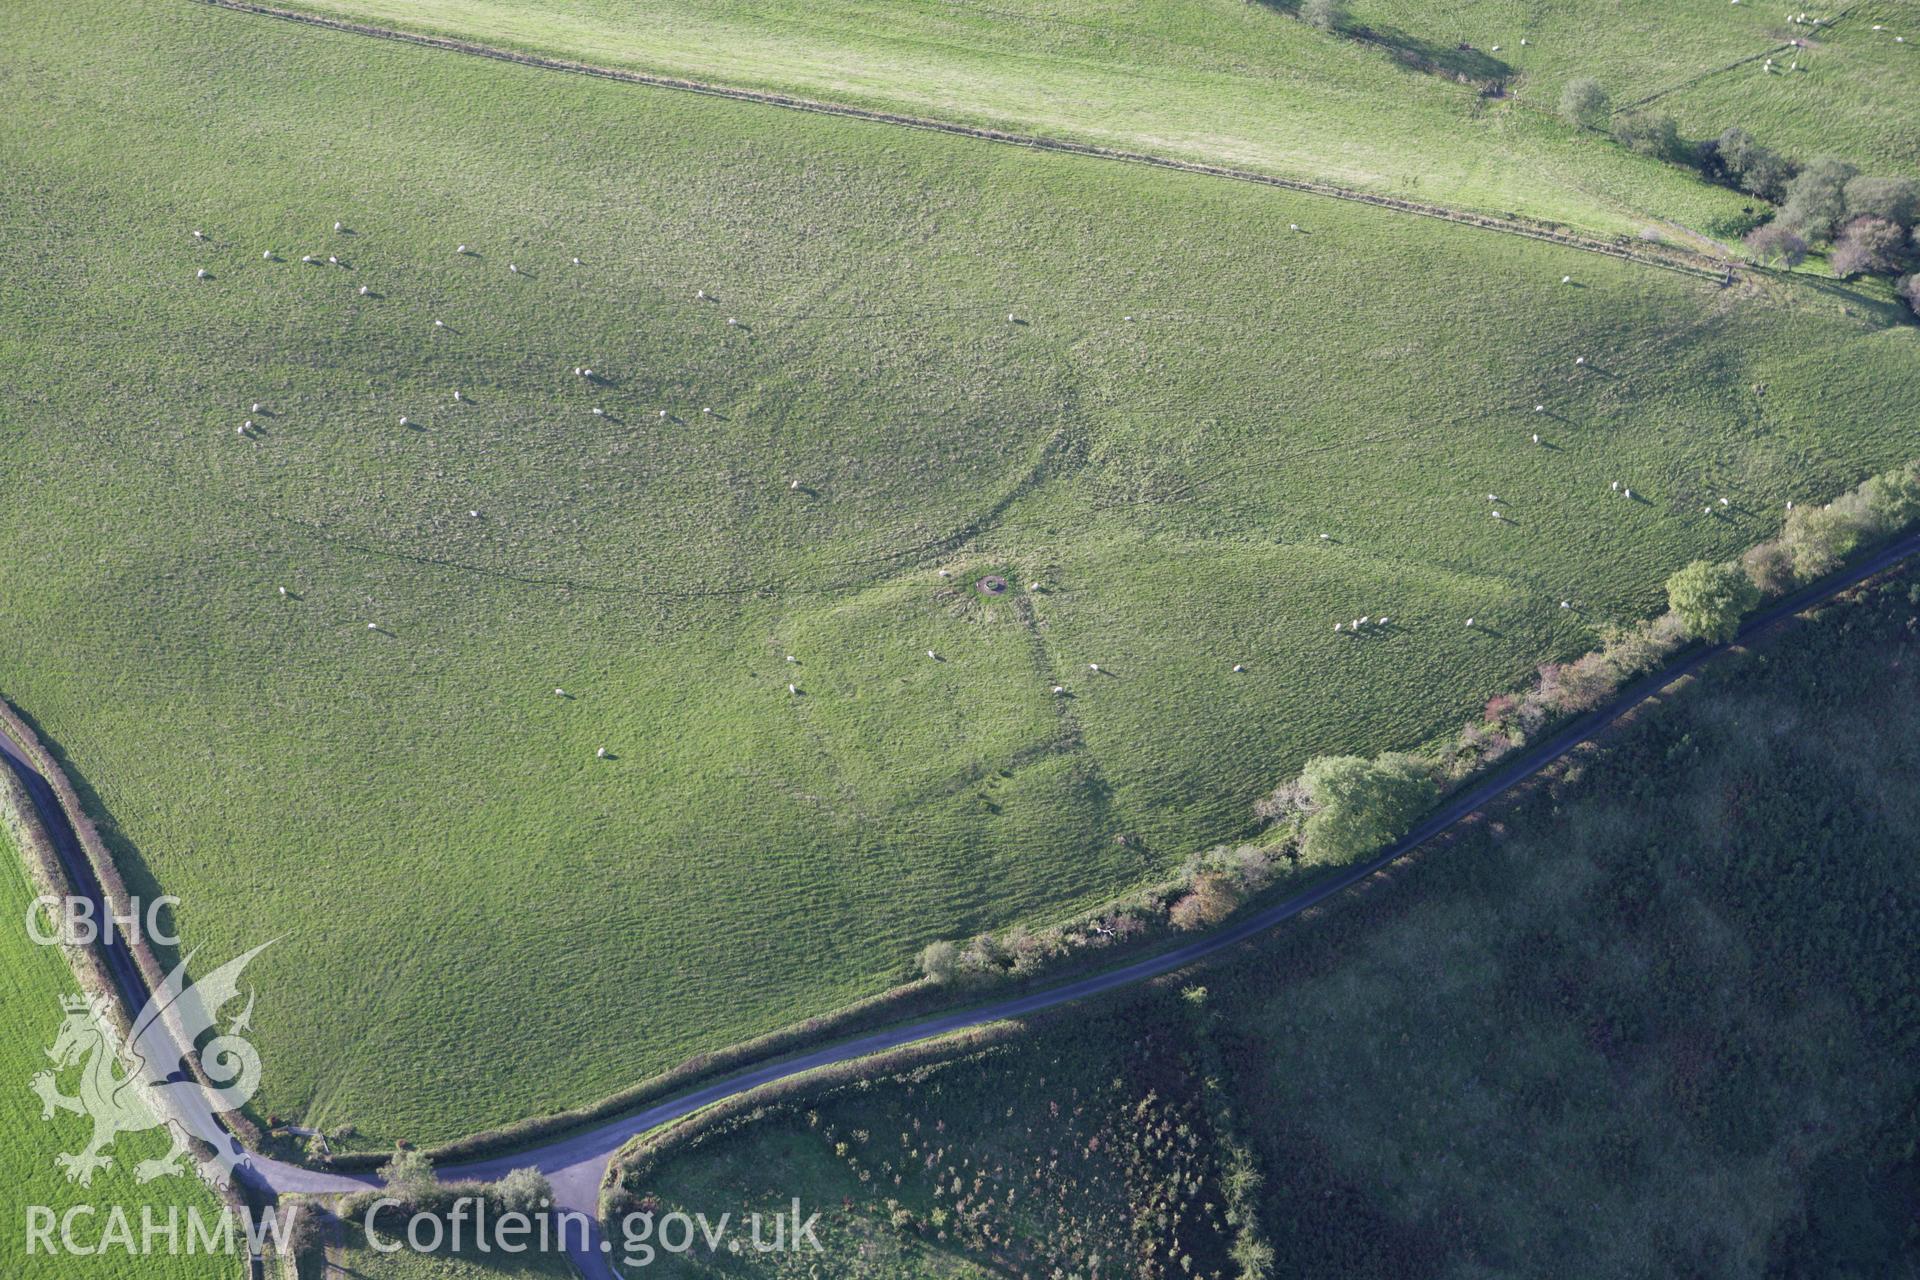 RCAHMW colour oblique photograph of Cwmargenau, possible Roman fortlet. Taken by Toby Driver on 04/10/2007.